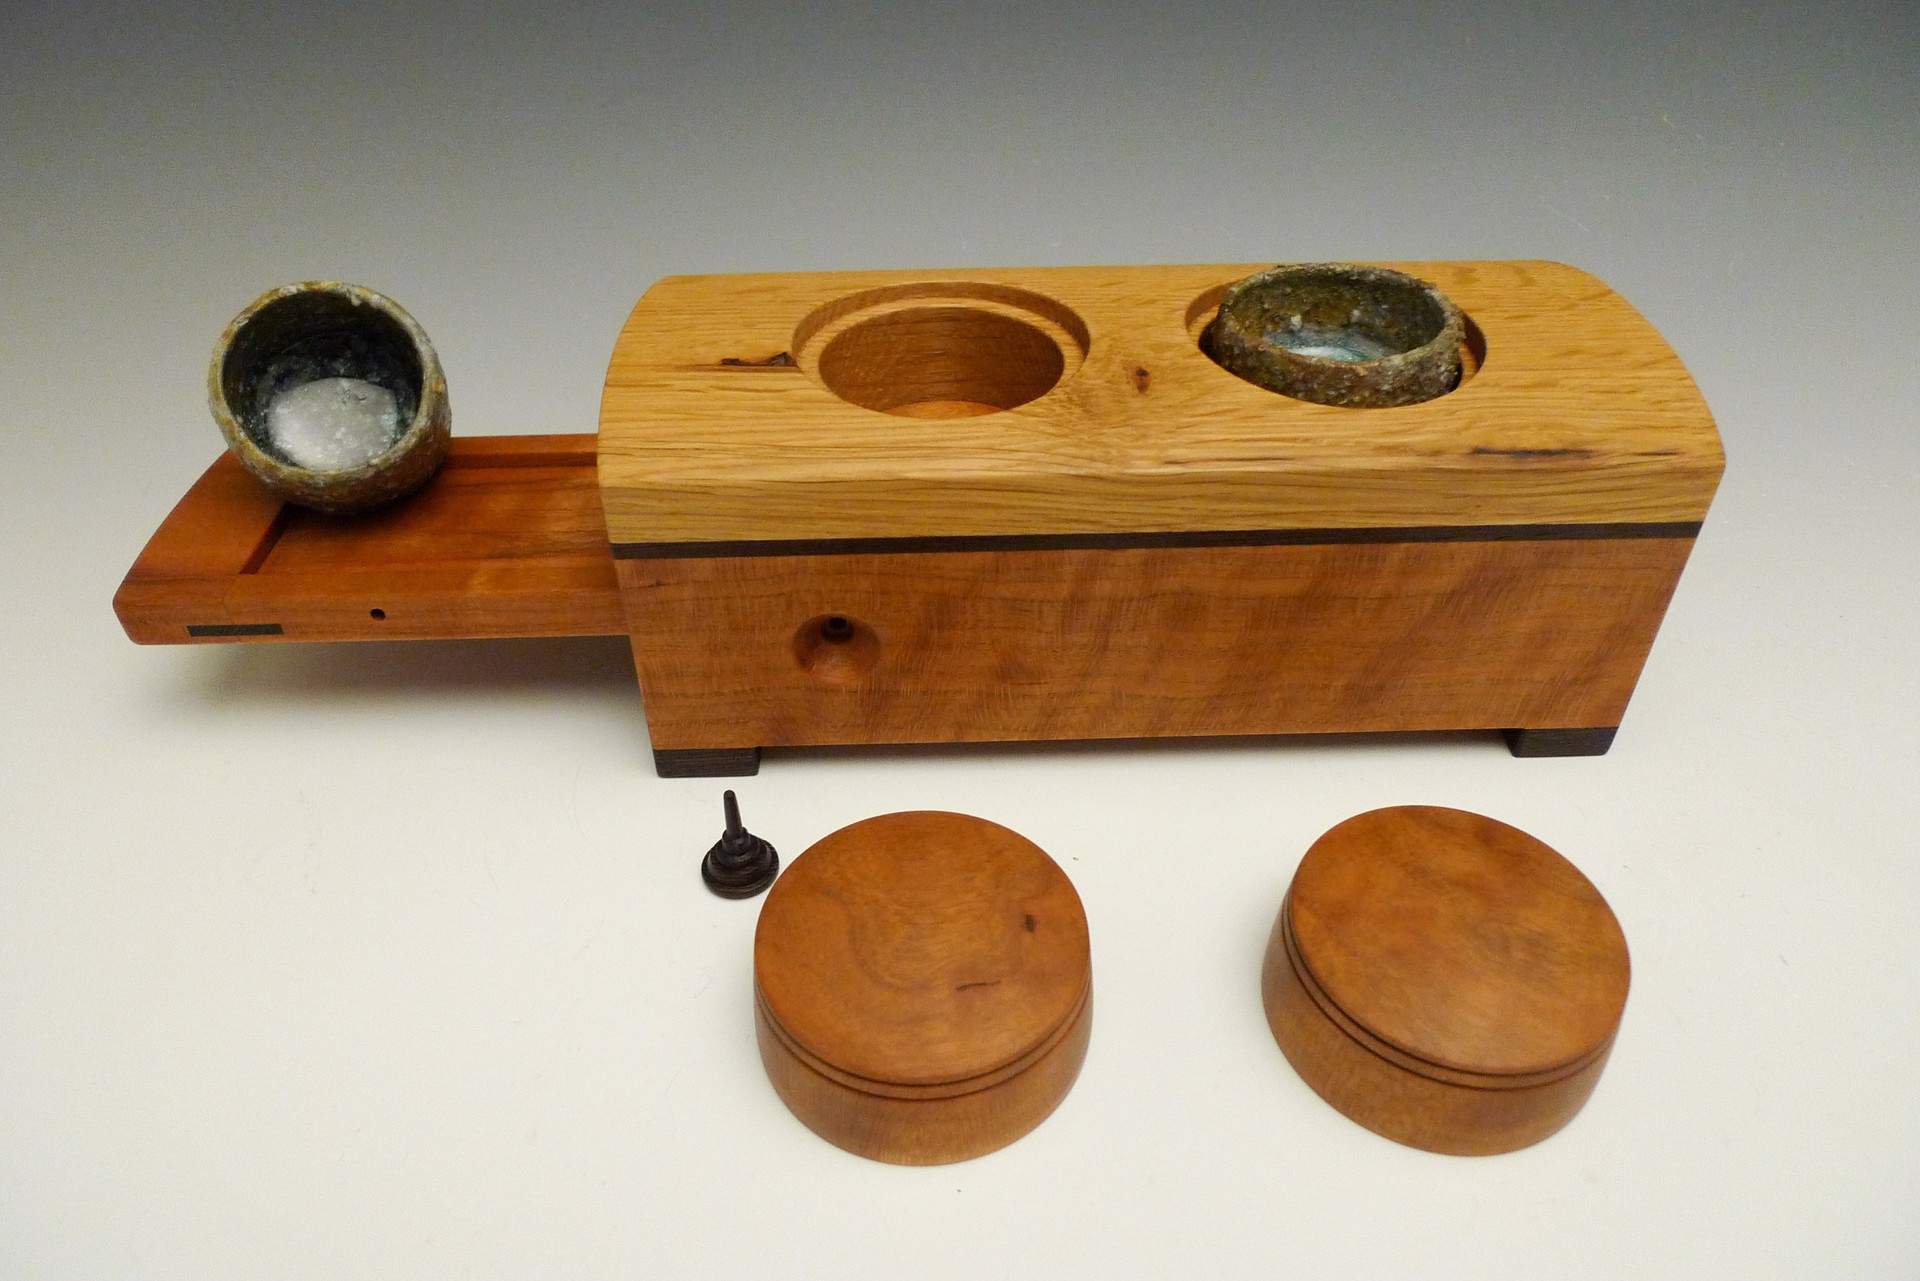 Homage to Retro Beam Form with Tray by Reid Schoonover